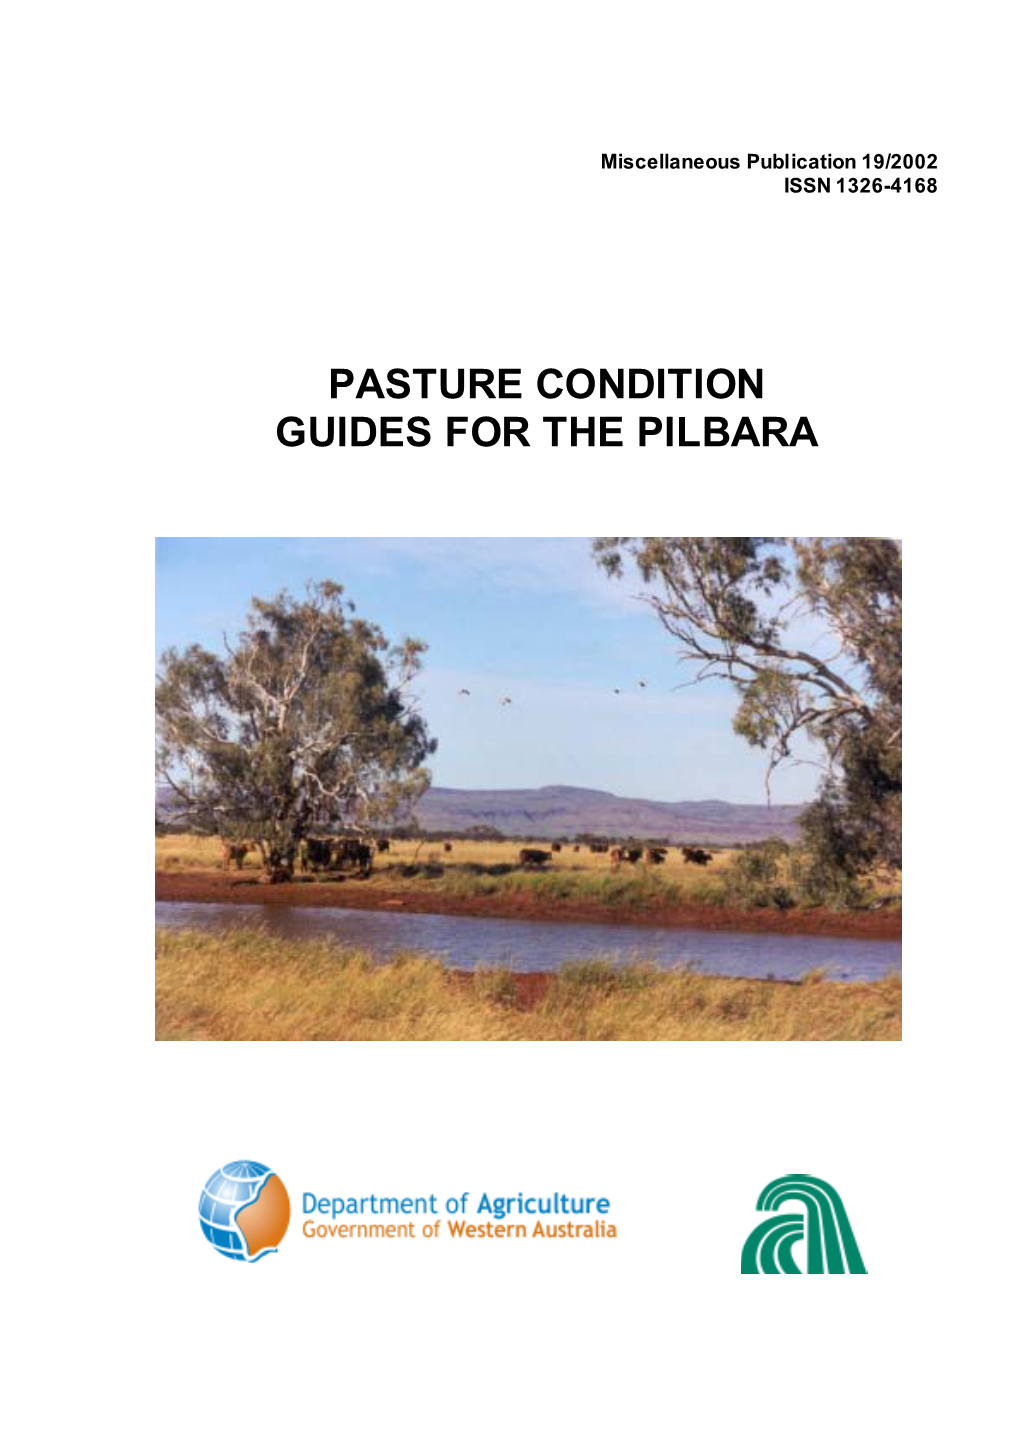 Pasture Condition Guides for the Pilbara